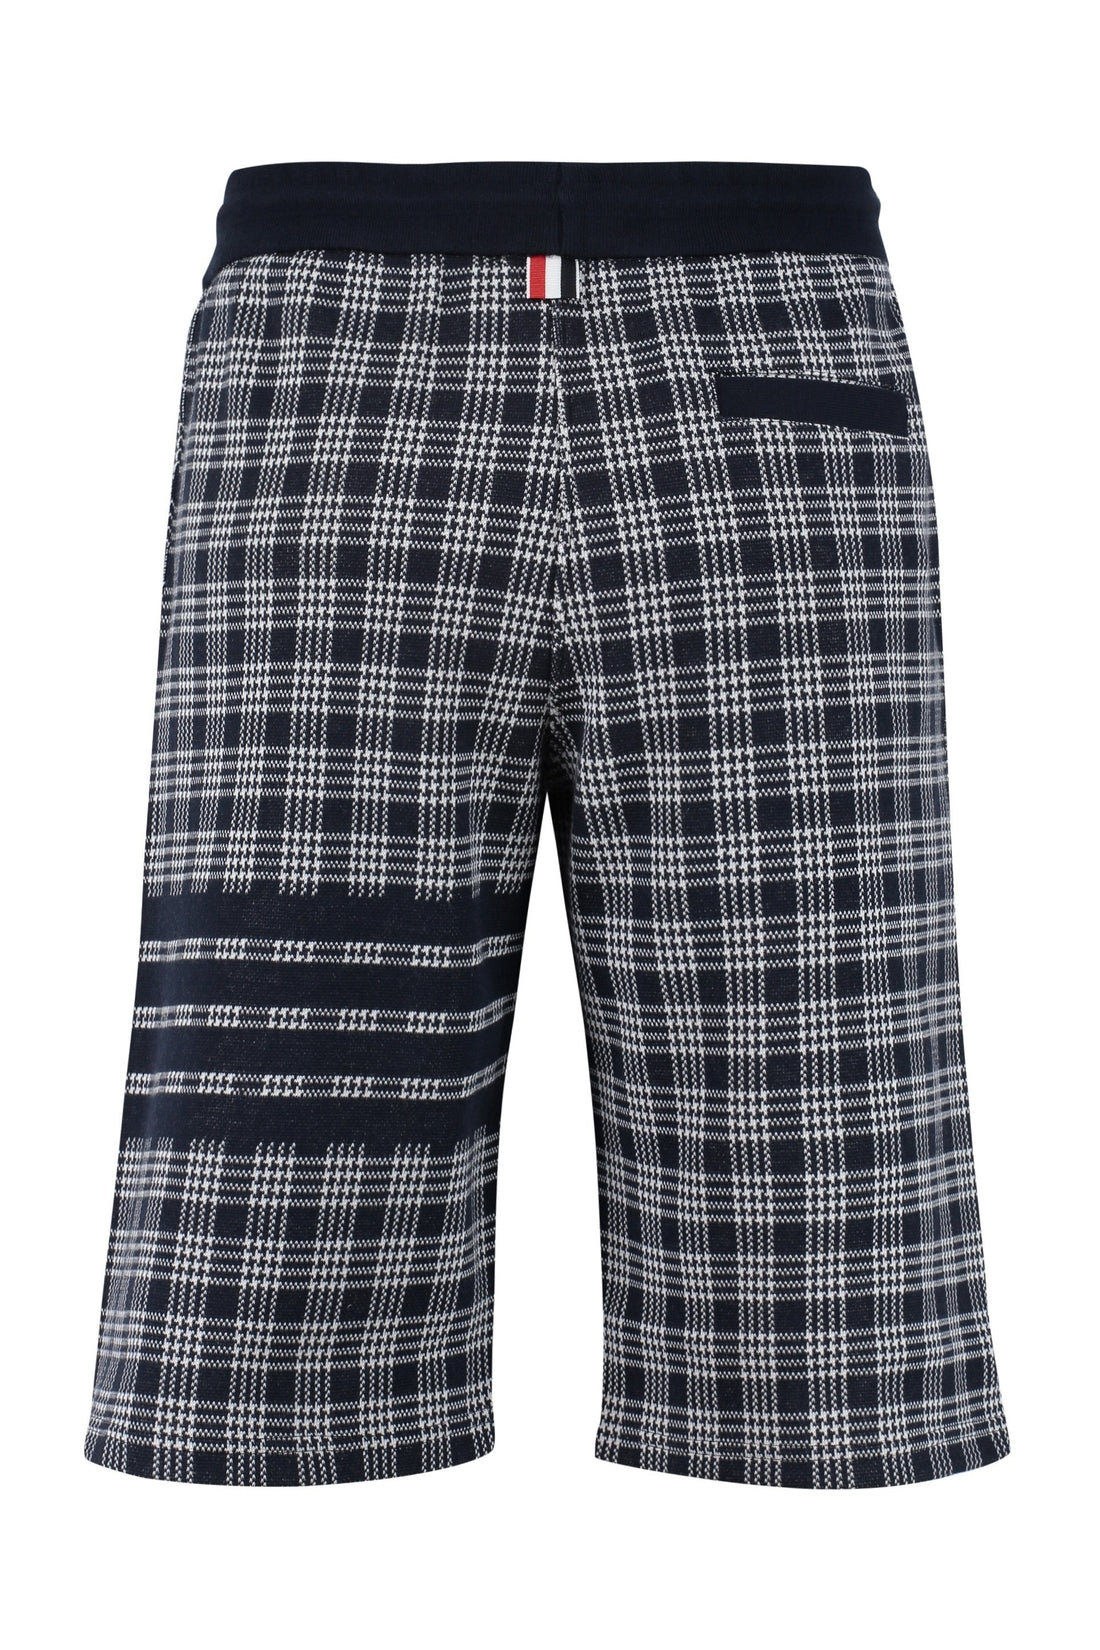 Thom Browne-OUTLET-SALE-Checked cotton shorts-ARCHIVIST